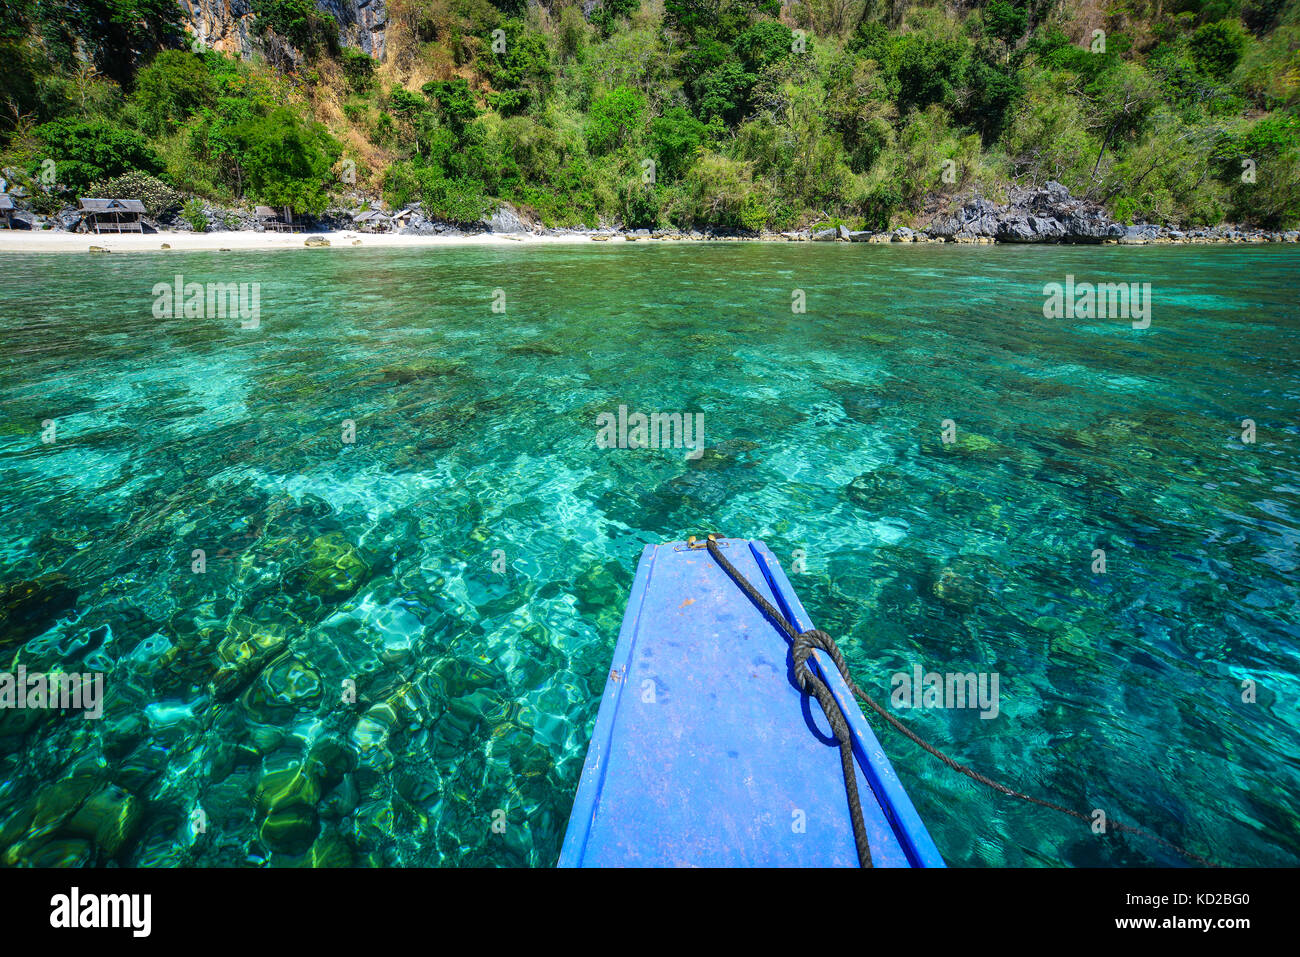 Wooden boat floating on Coron Island, Philippines. Coron is known for several Japanese shipwrecks of World War II vintage. Stock Photo